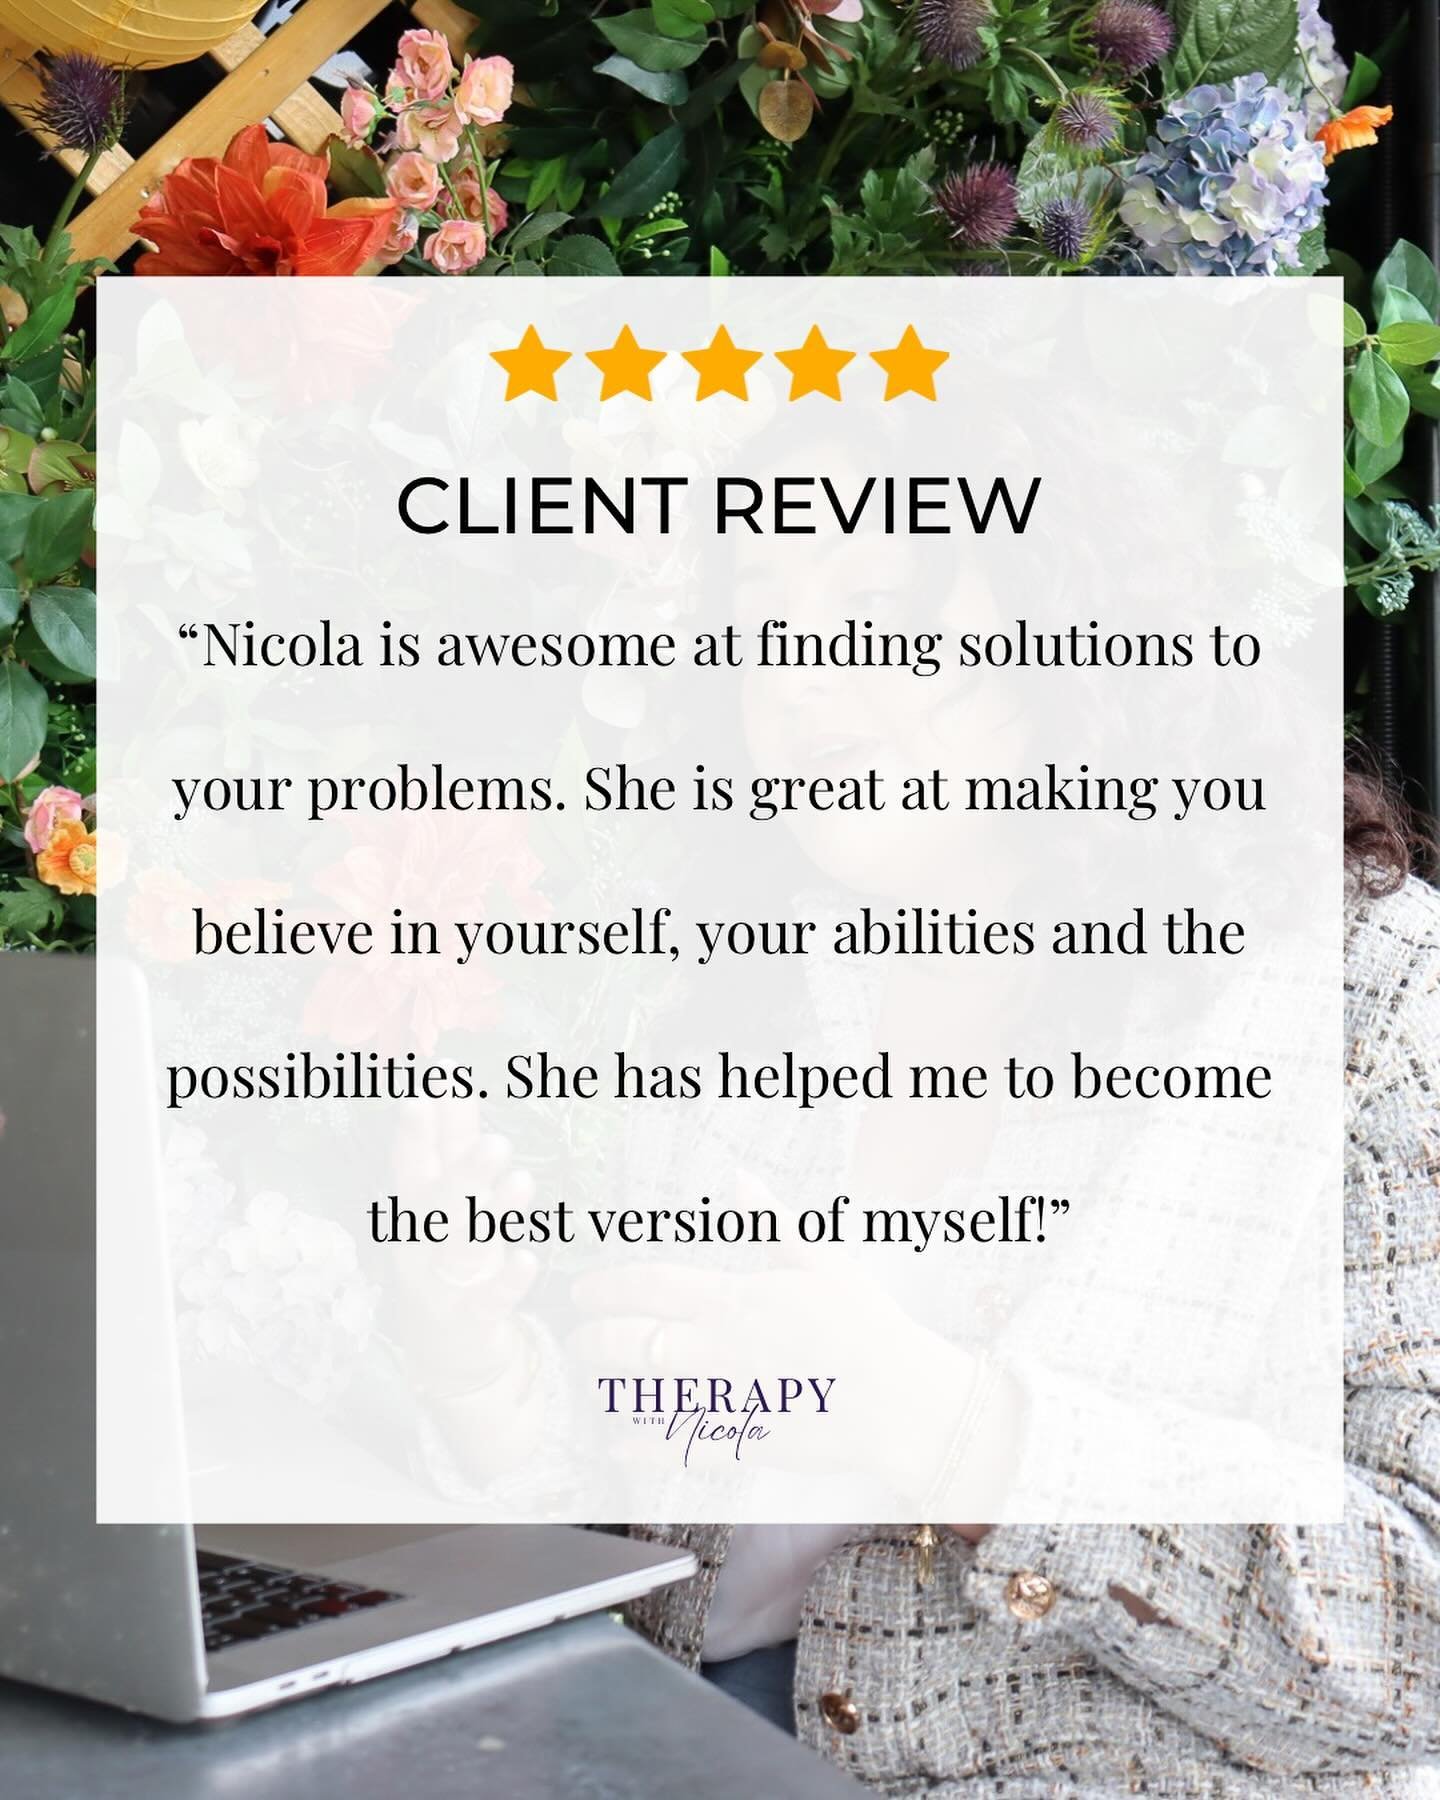 Thank you for a lovely review

Get in touch to book an appointment

Click the link in bio or visit www.therapywithnicola.com

Appointments available in Manchester, Cheshire or Online.

Home services also available for your comfort and convenience

#m